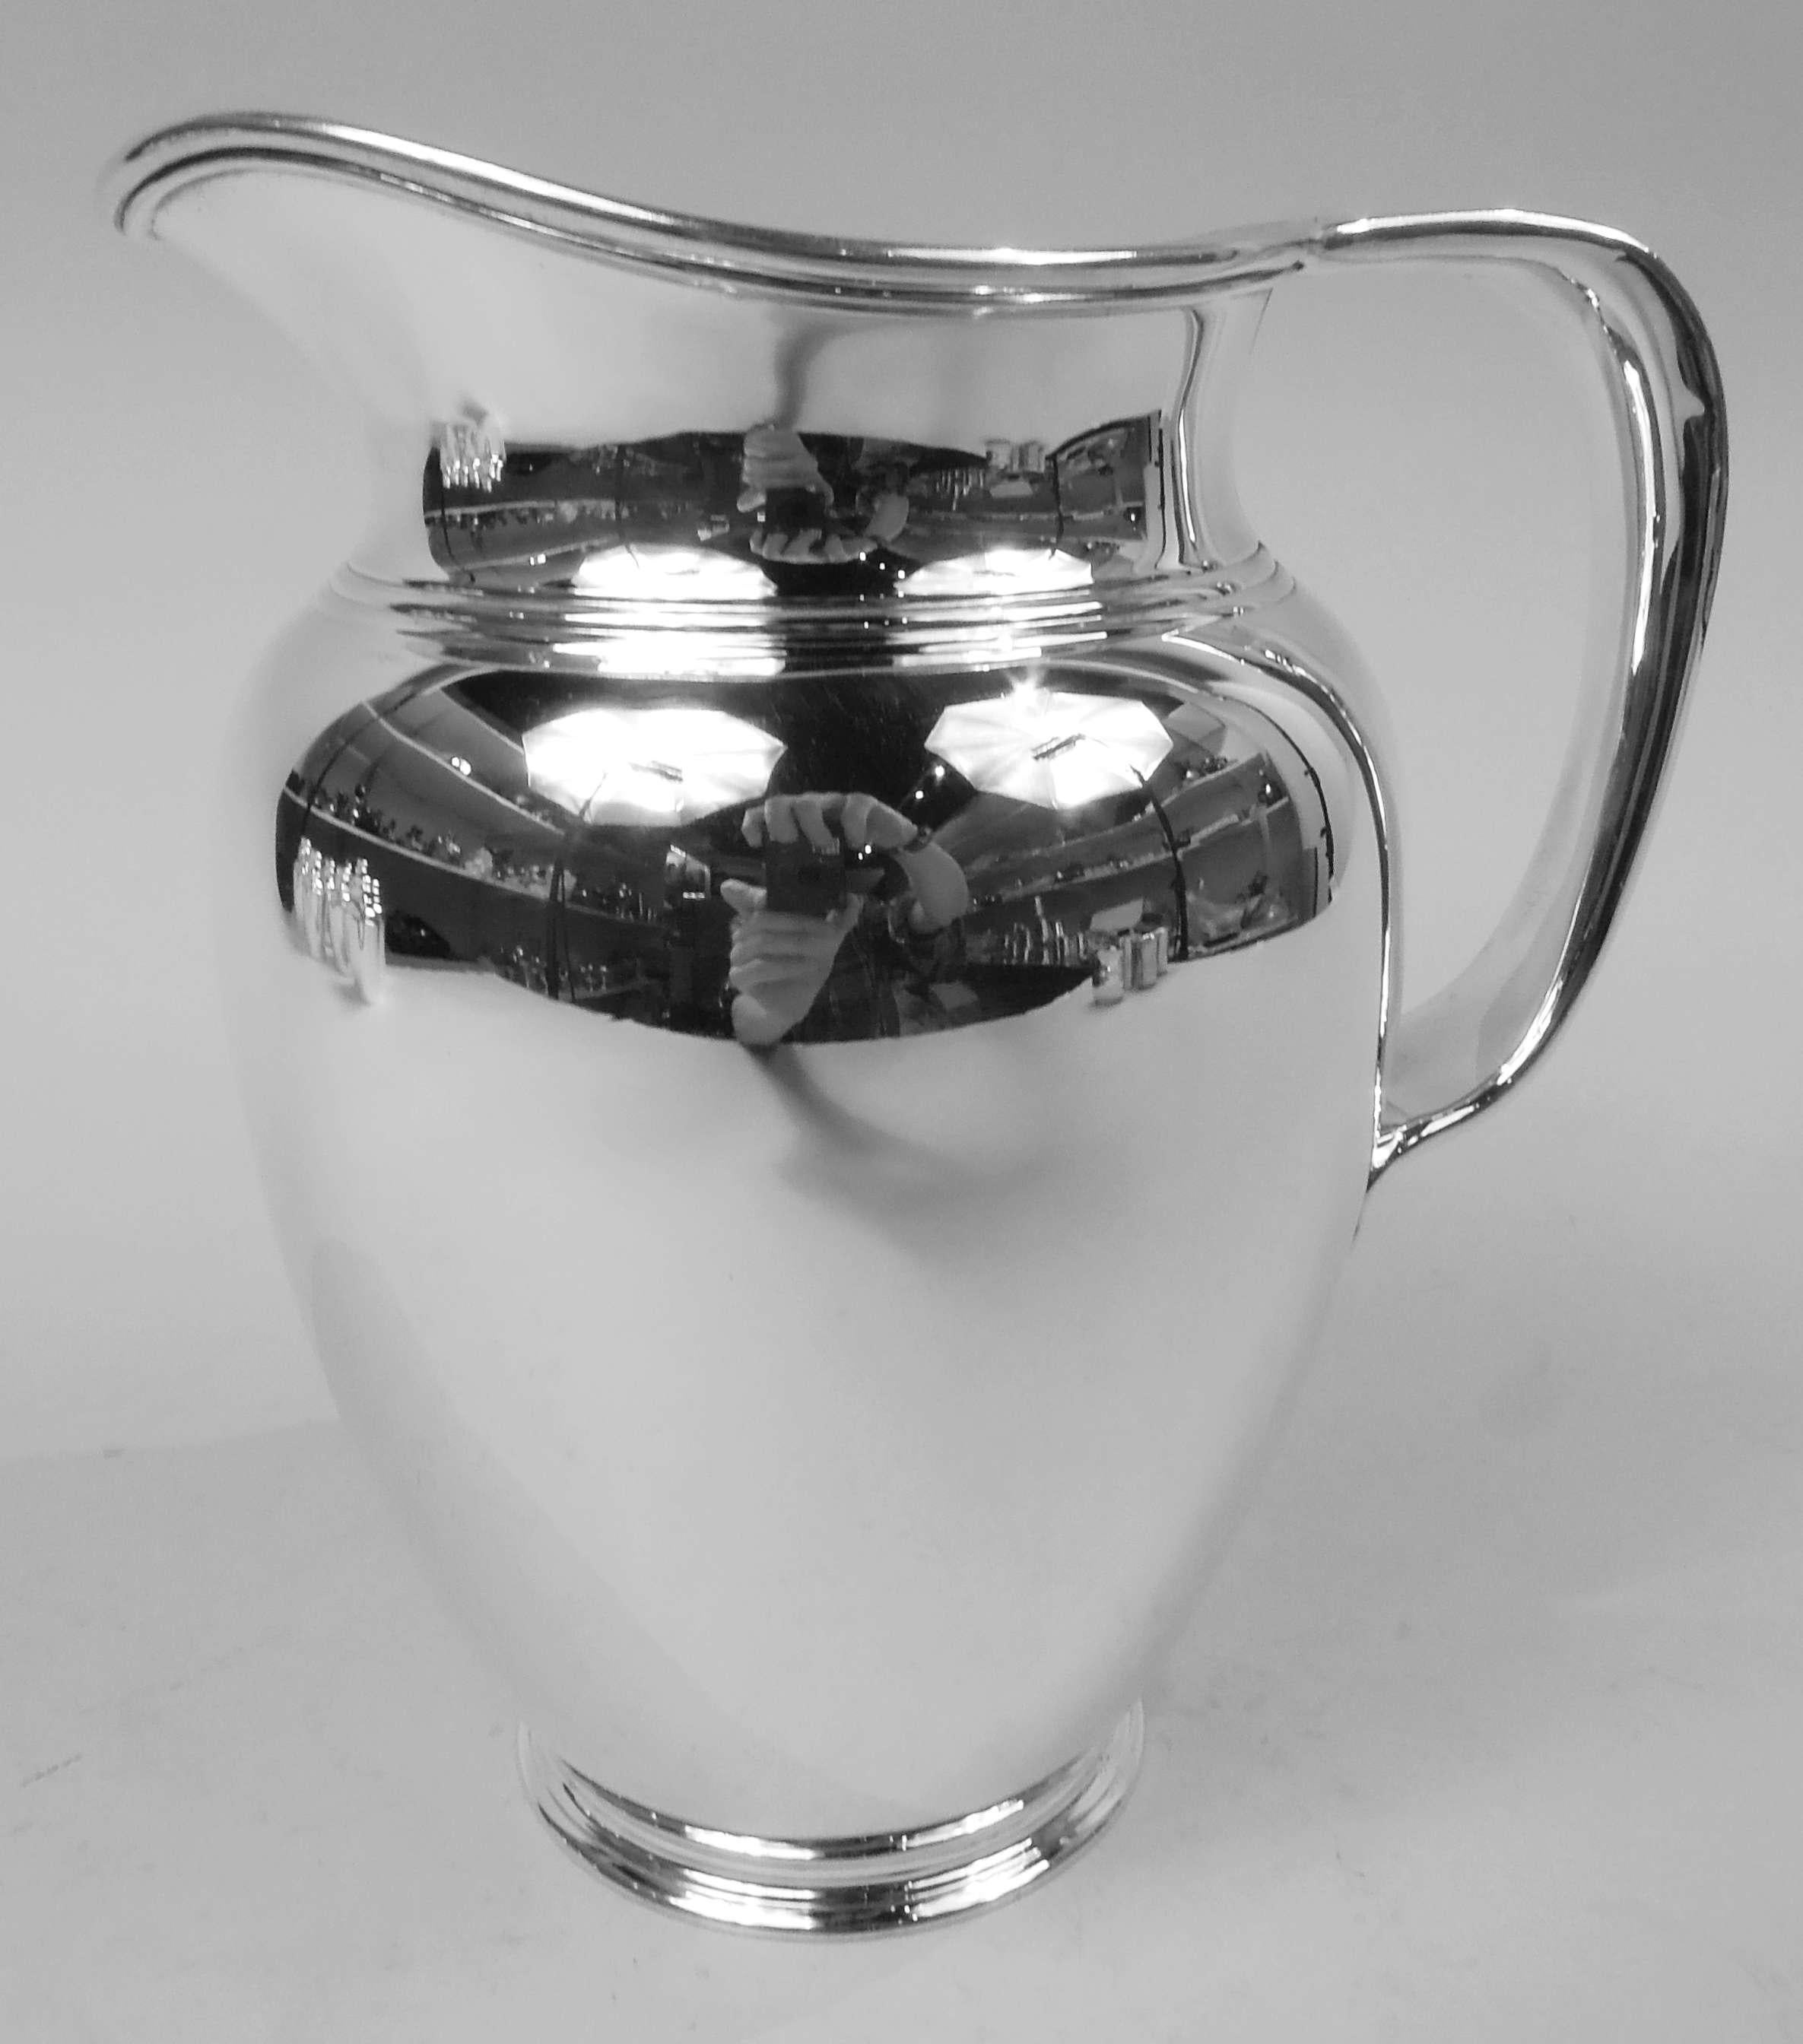 Modern sterling silver water pitcher. Made by Tiffany & Co. in New York, ca 1907. Ovoid body, stepped foot, short neck, and helmet mouth; soft bracket handle with trefoil shaped tail mount. A spare full-bodied vessel. Nice heft. Fully marked